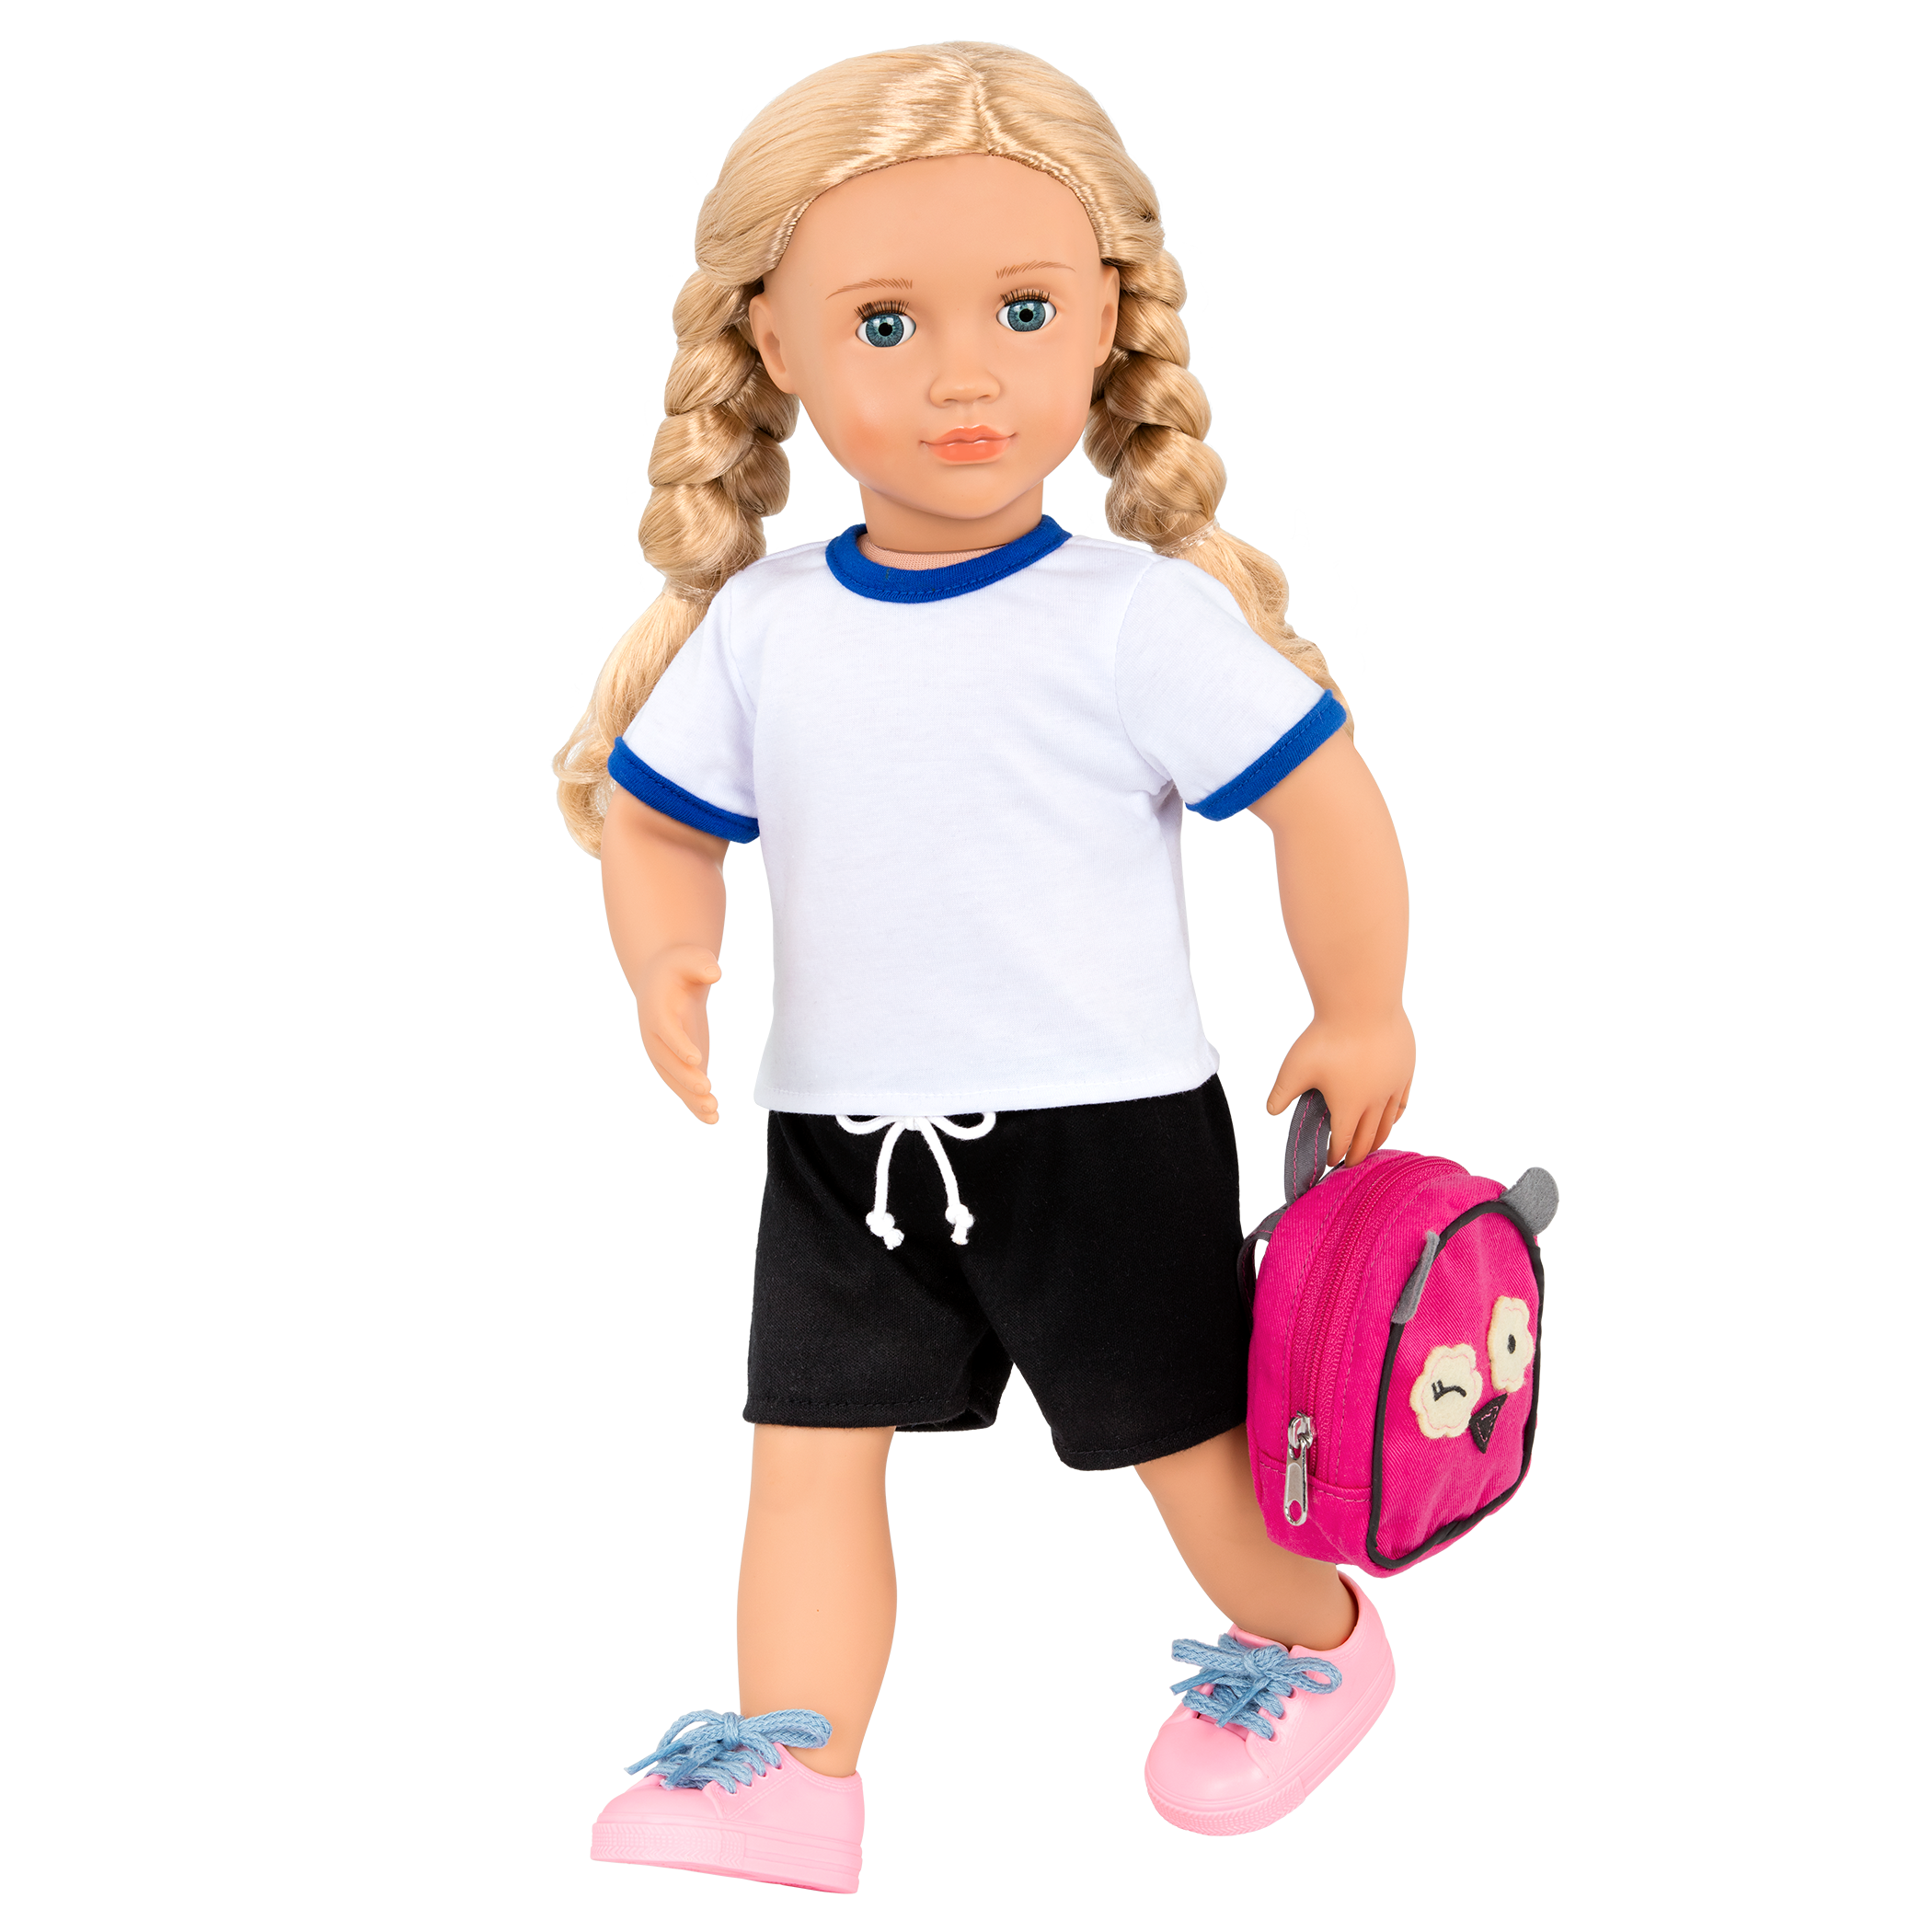 18-inch doll with blonde hair, blue eyes, school accessories and storybook